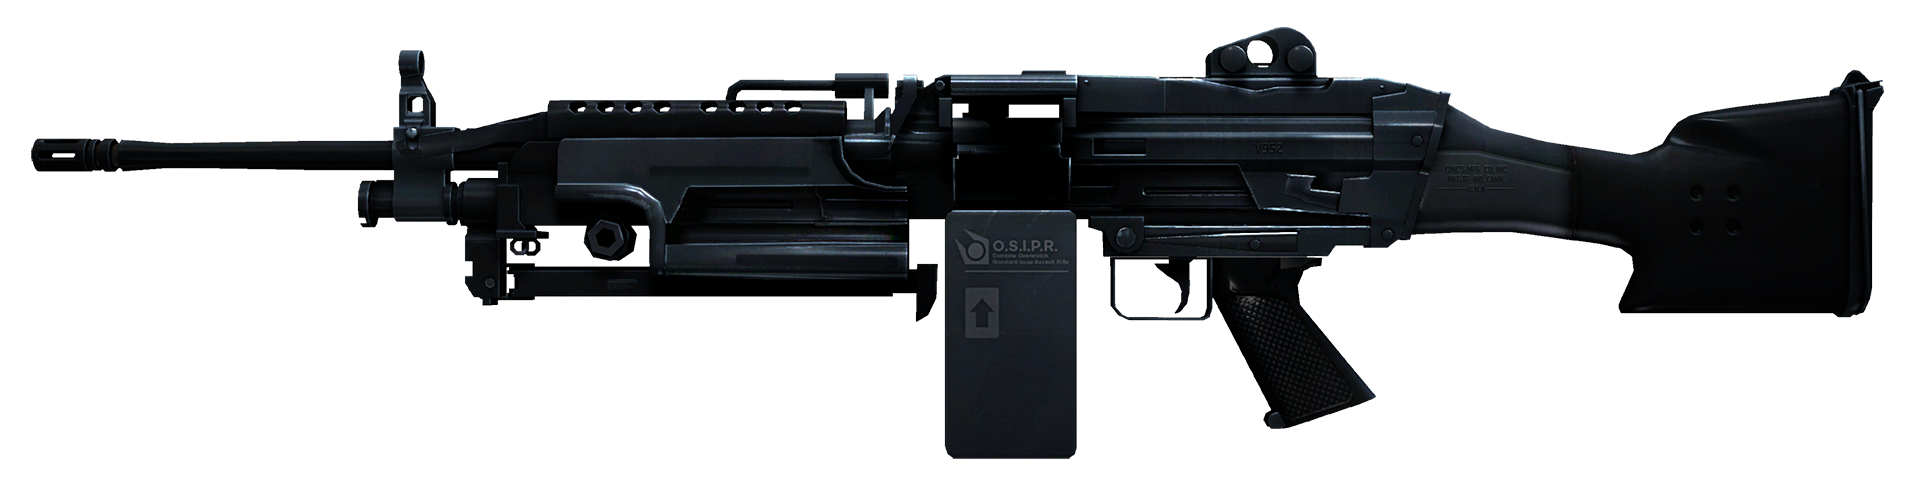 M249 O.S.I.P.R. Large Rendering